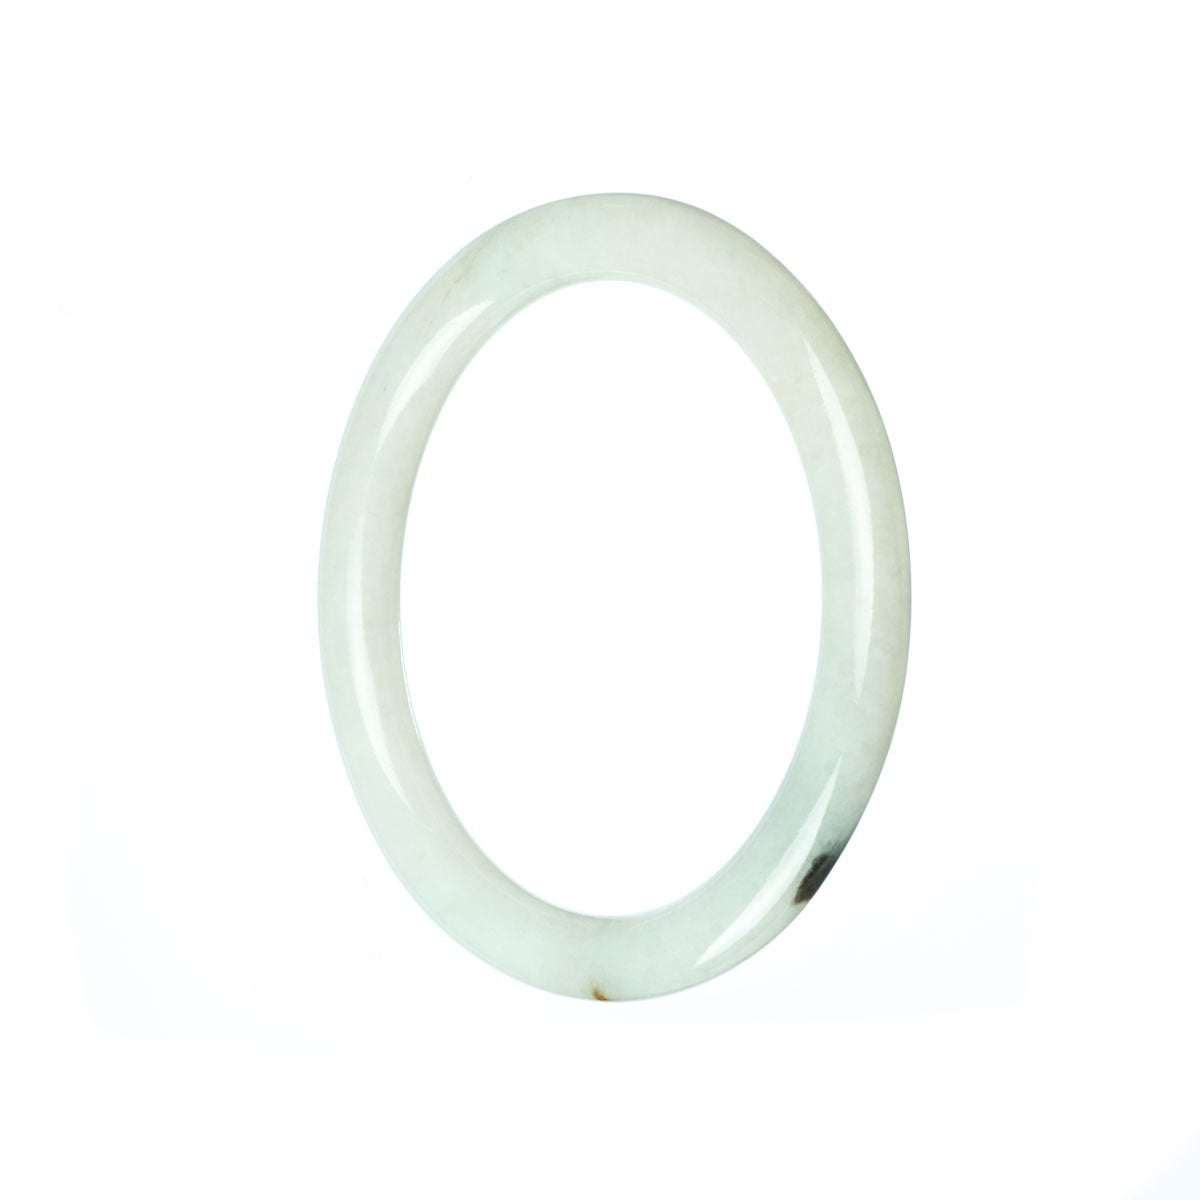 A small, round white jadeite jade bangle with authentic Grade A quality, measuring 53mm in size. Sold by MAYS GEMS.